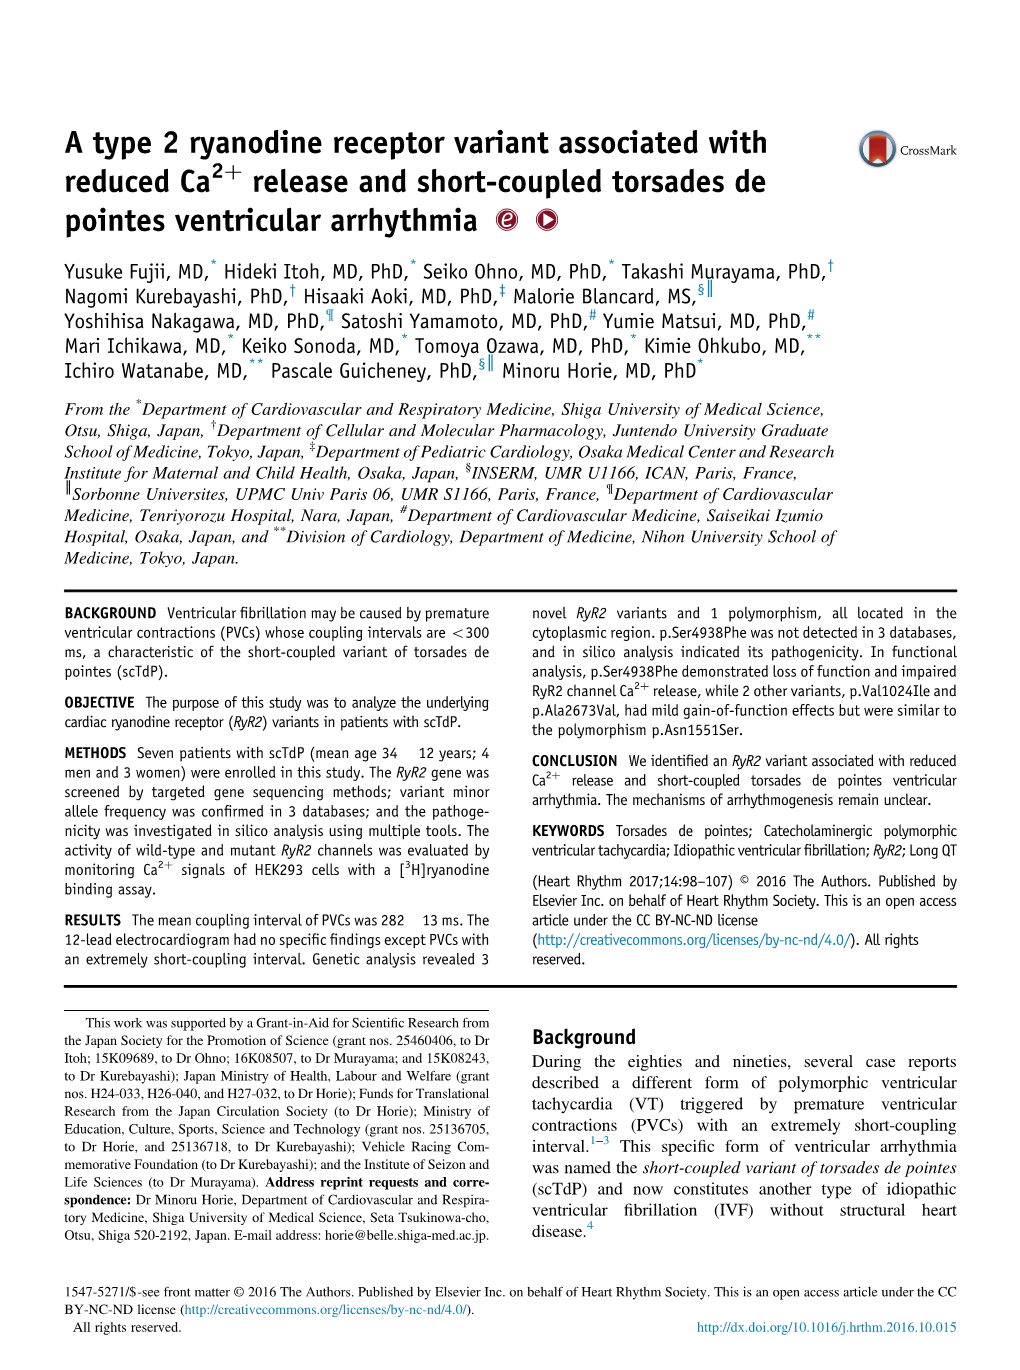 A Type 2 Ryanodine Receptor Variant Associated with Reduced Ca2+ Release and Short-Coupled Torsades De Pointes Ventricular Arrhy